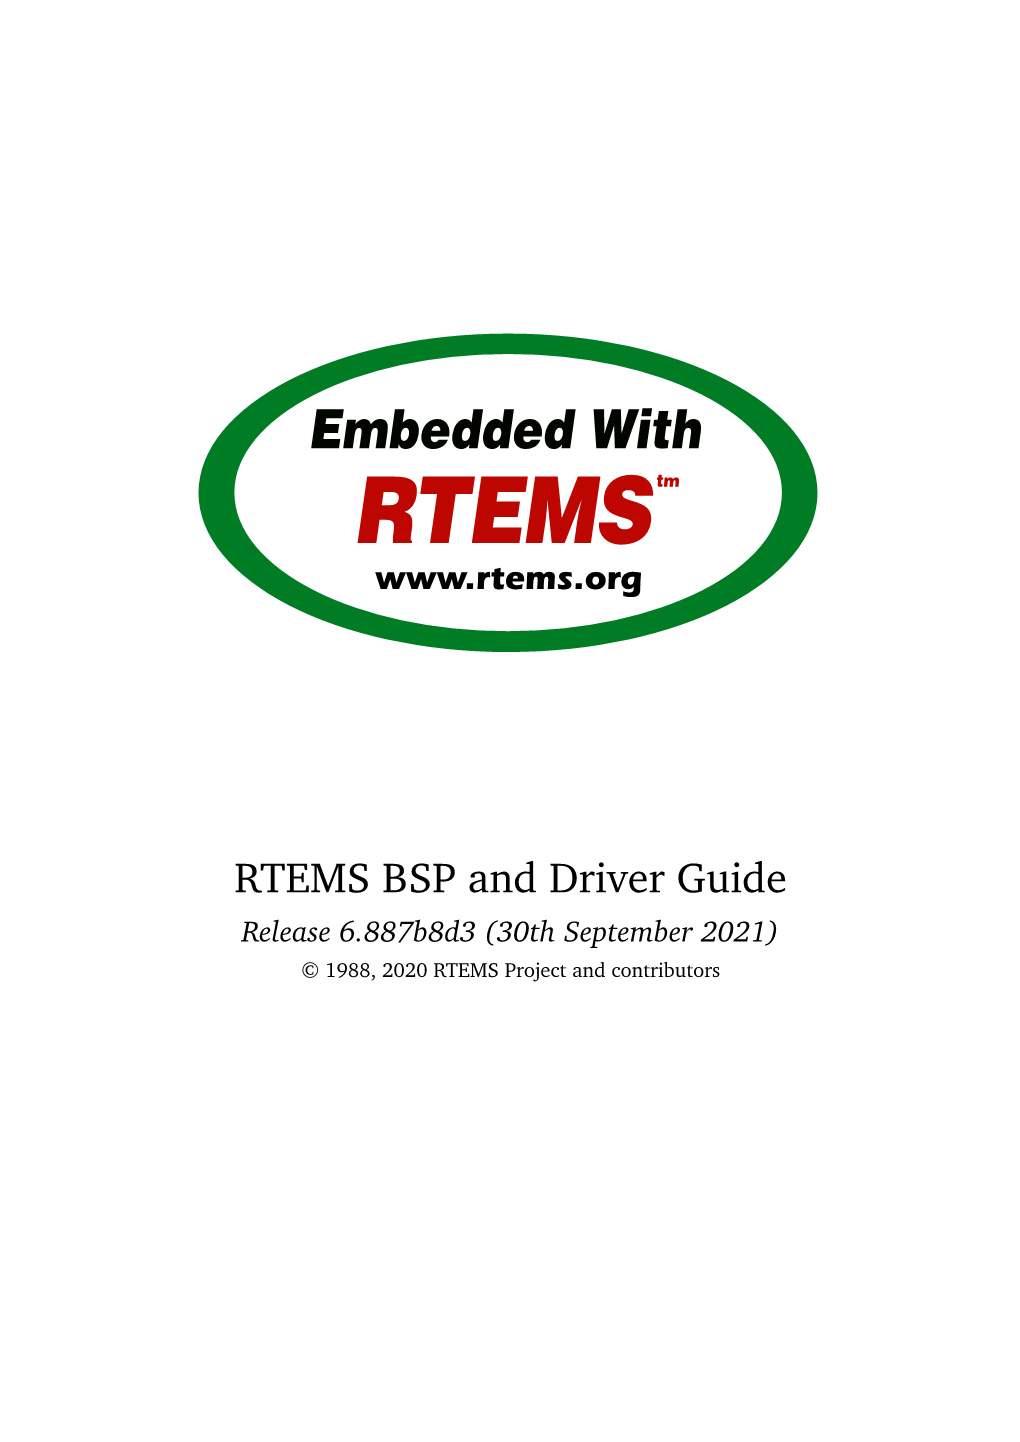 RTEMS BSP and Driver Guide Release 6.887B8d3 (30Th September 2021) © 1988, 2020 RTEMS Project and Contributors